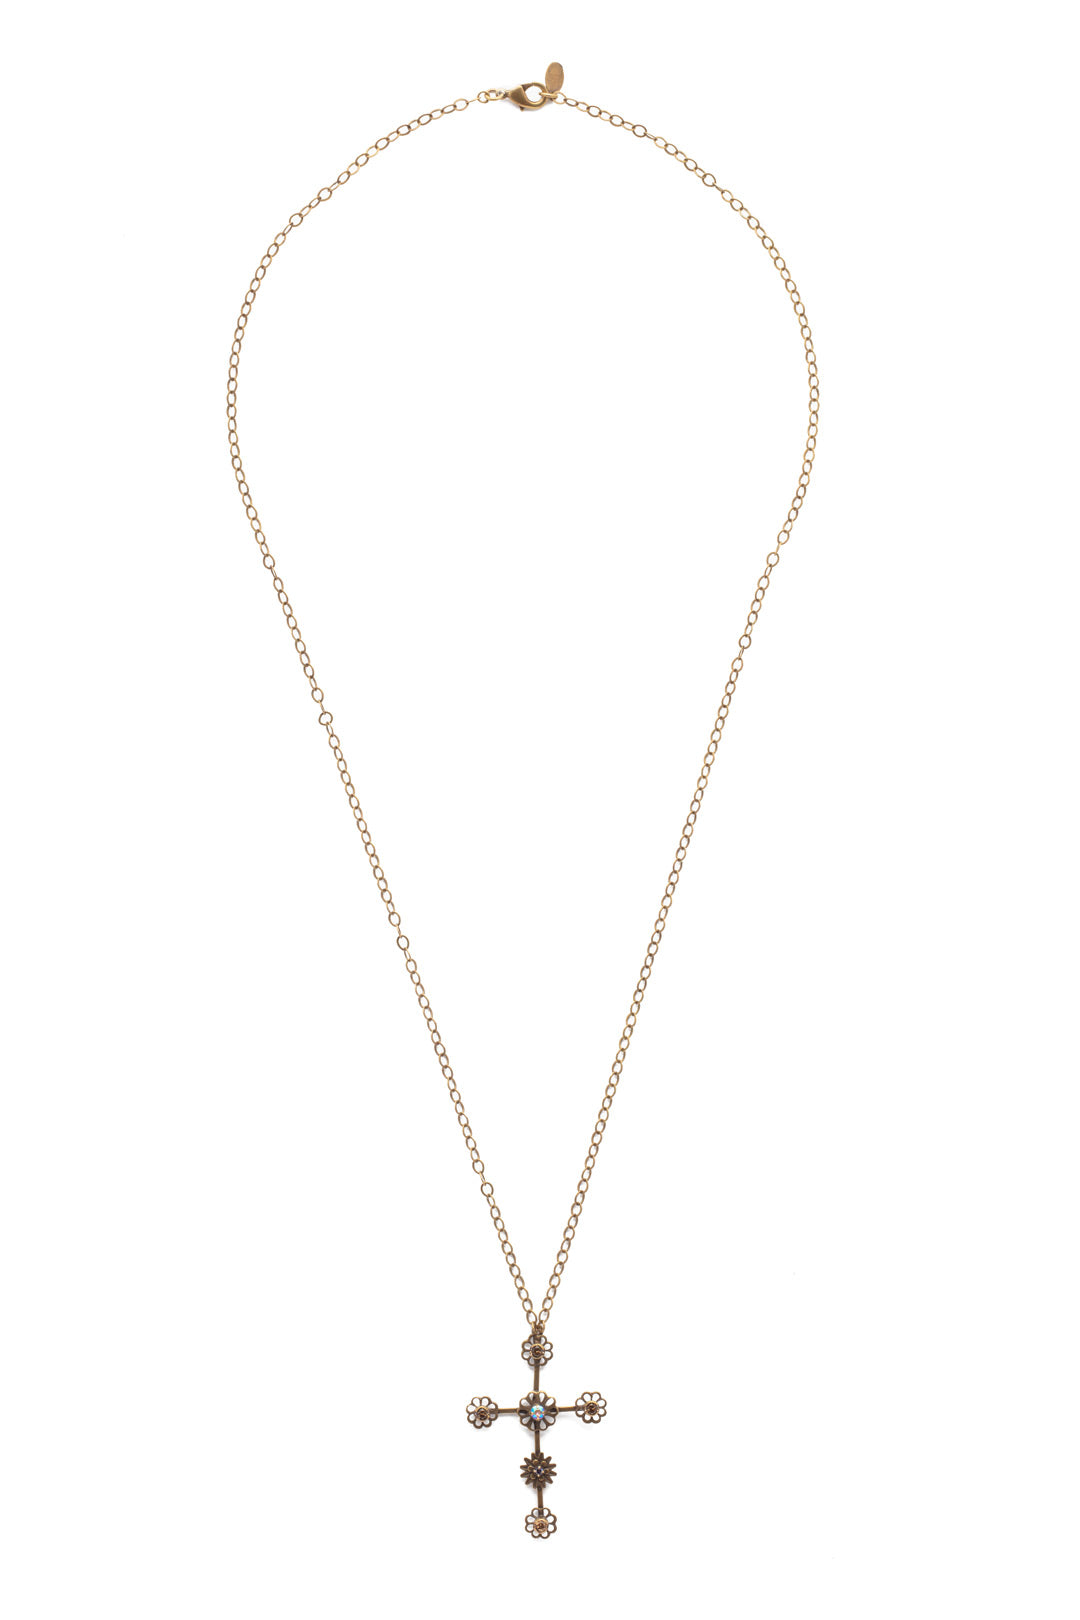 Logan Cross Pendant Necklace - NEX3AGMIR - <p>Perfect for spring, the Logan Cross Pendant Necklace beautifully blends flowers and crystals on a cross pendant, hanging from an adjustable chain. From Sorrelli's Mirage collection in our Antique Gold-tone finish.</p>